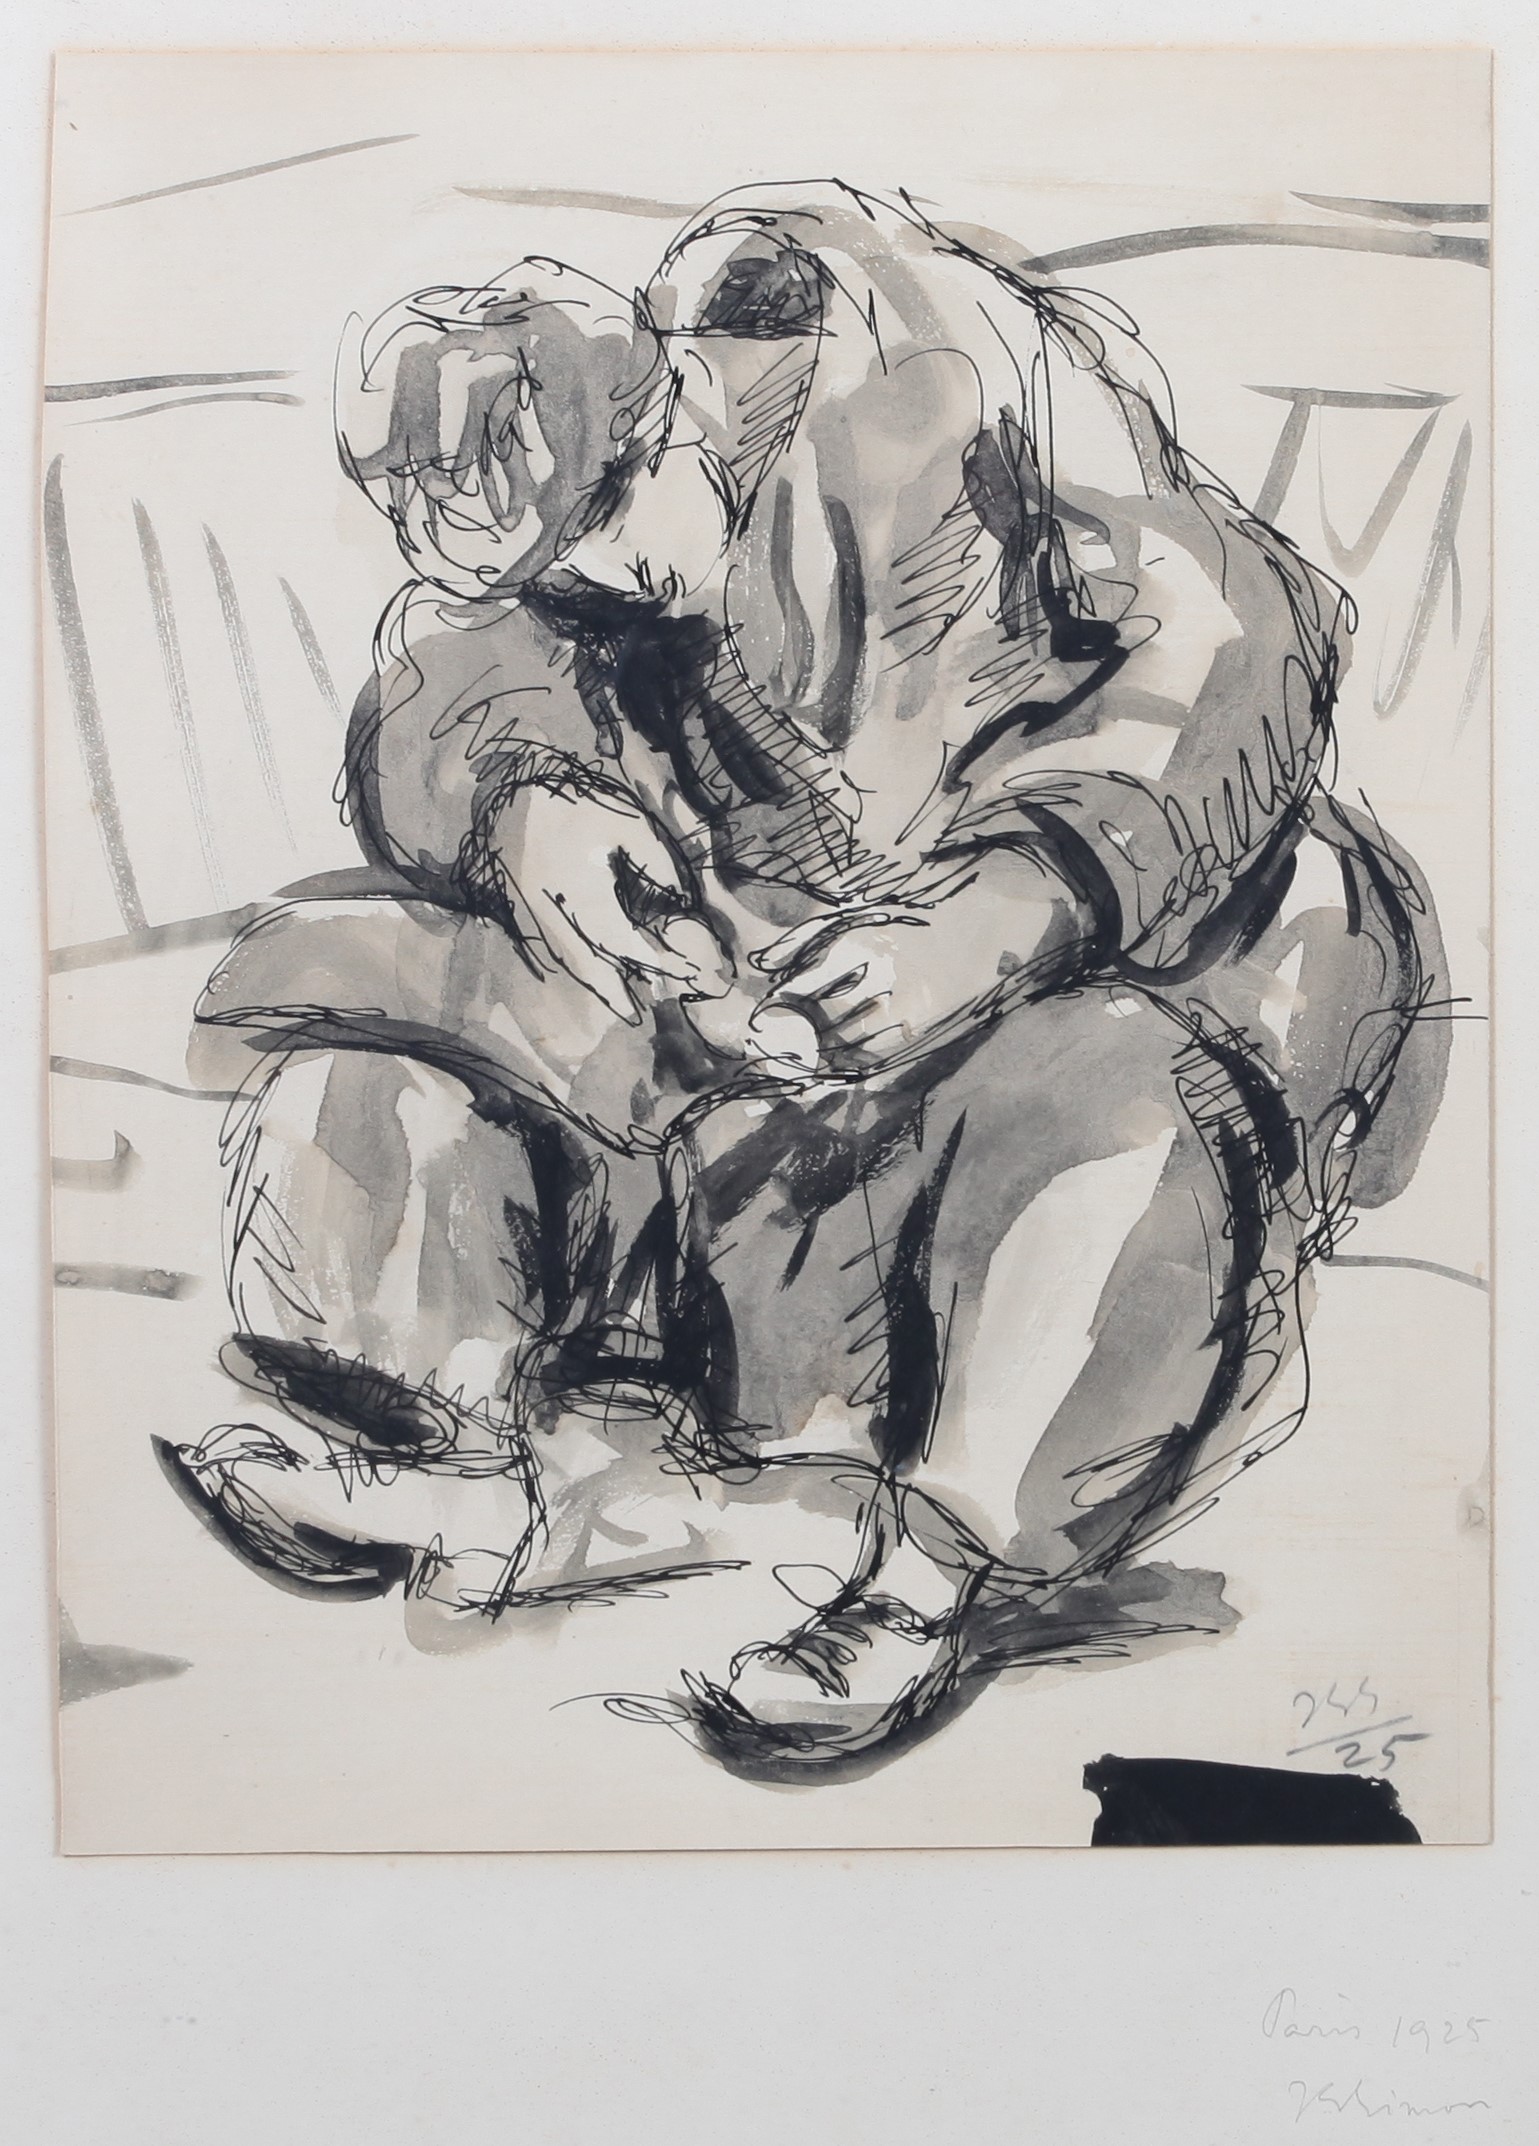 ARR JEAN-GEORGES SIMON (Hungarian 1894-1968) 'Seated Man' portrait, ink and wash, initialled and